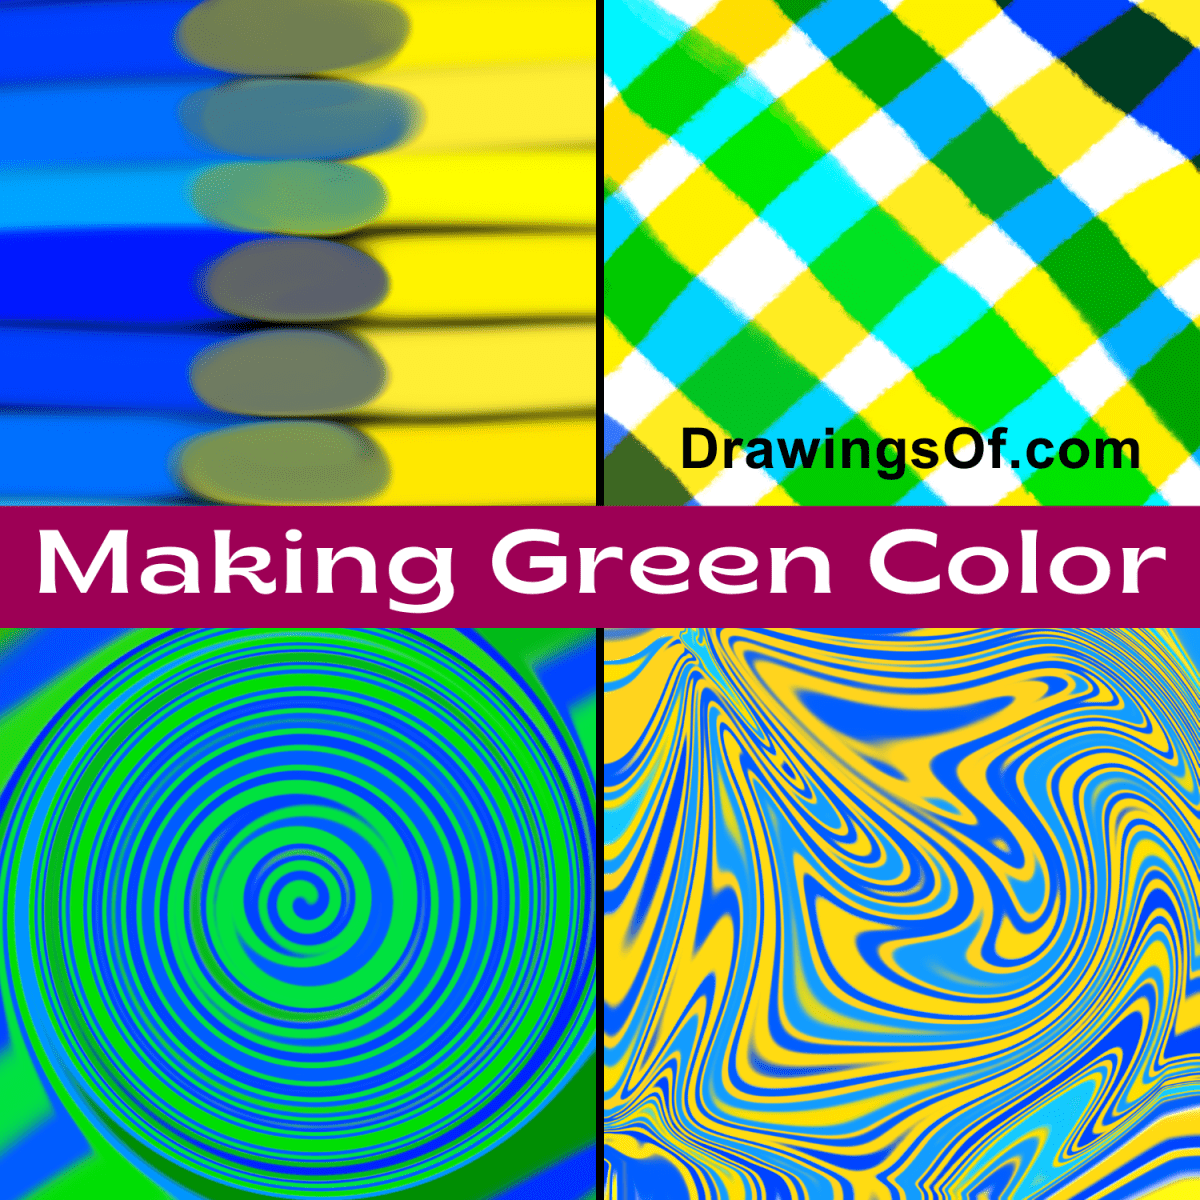 What colors make green?